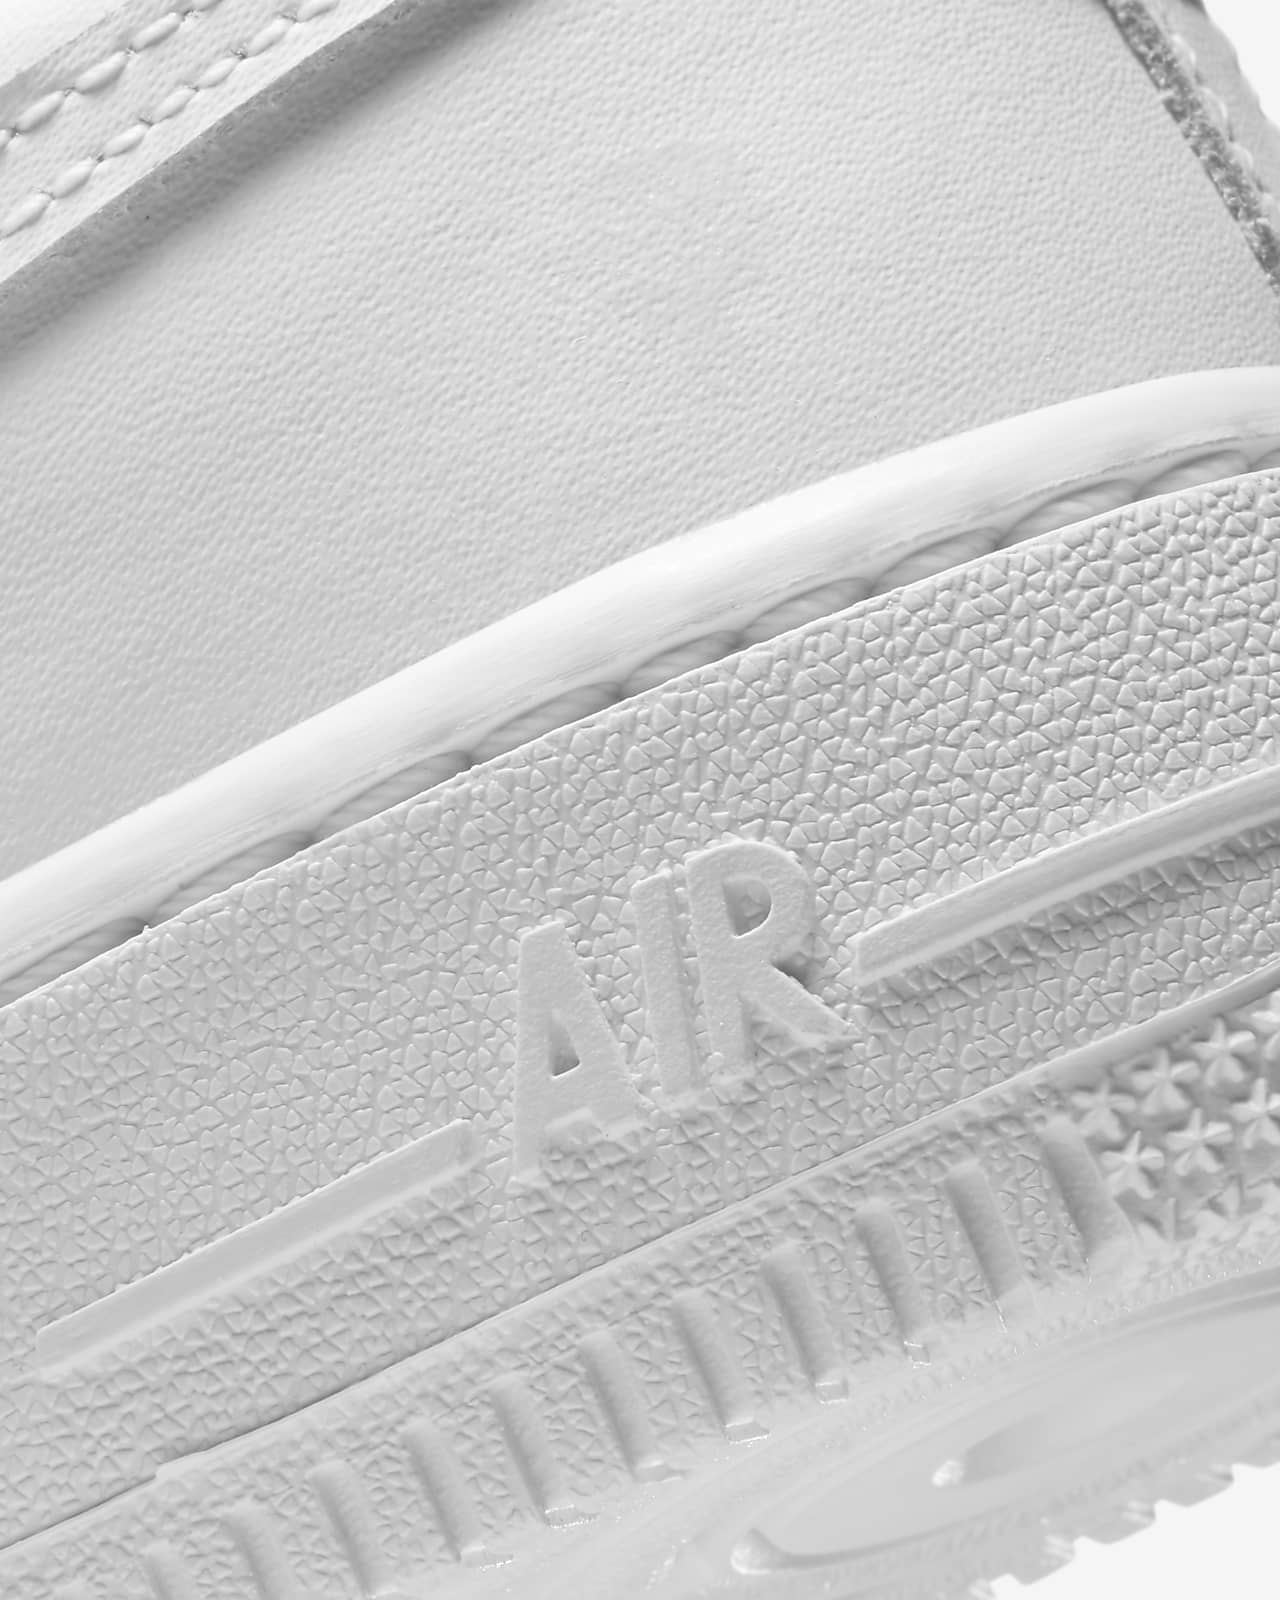 all white air forces boys